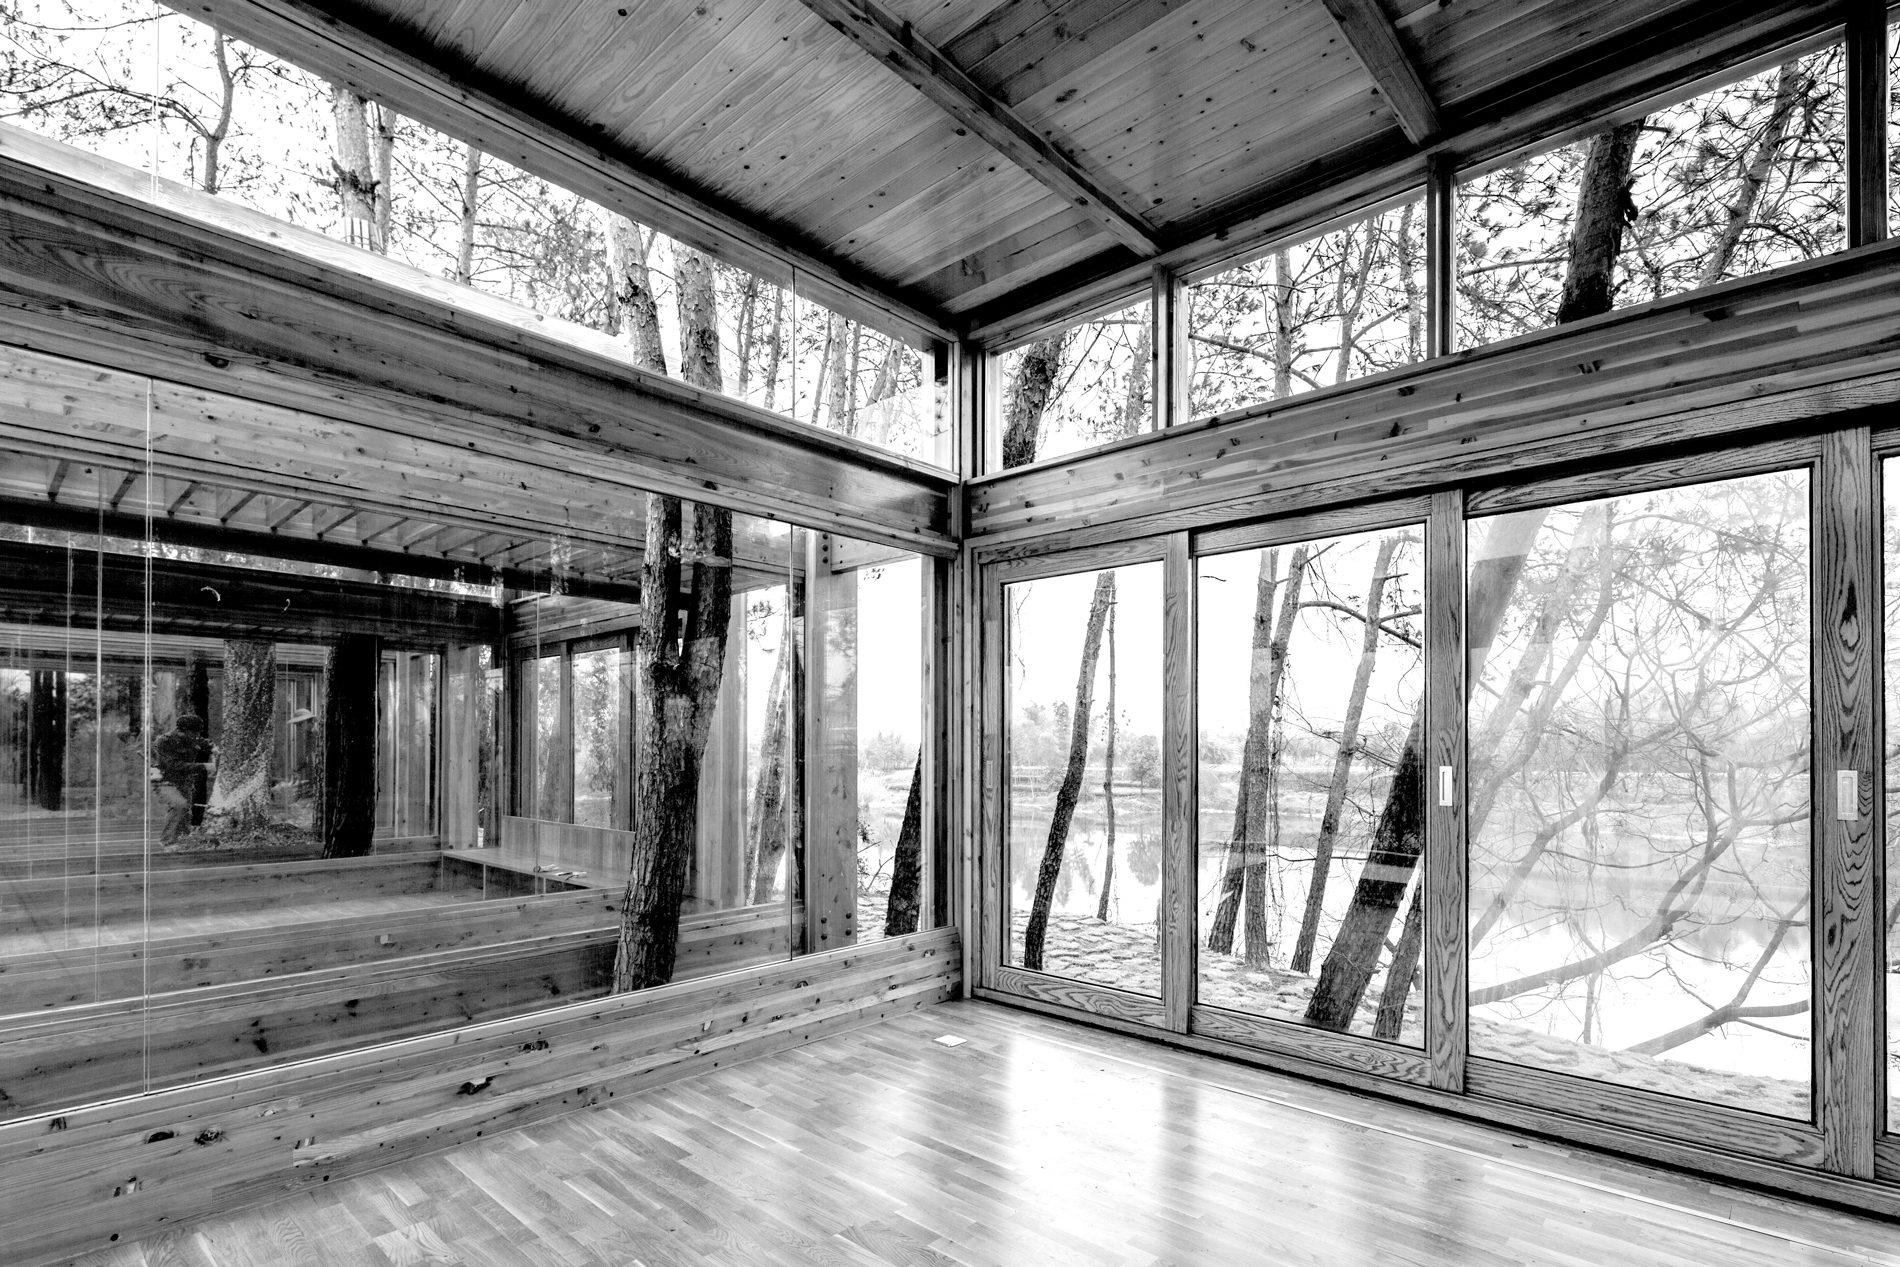 Black and white photograph of the interior or a room with walls made of windows that provide a view of trees